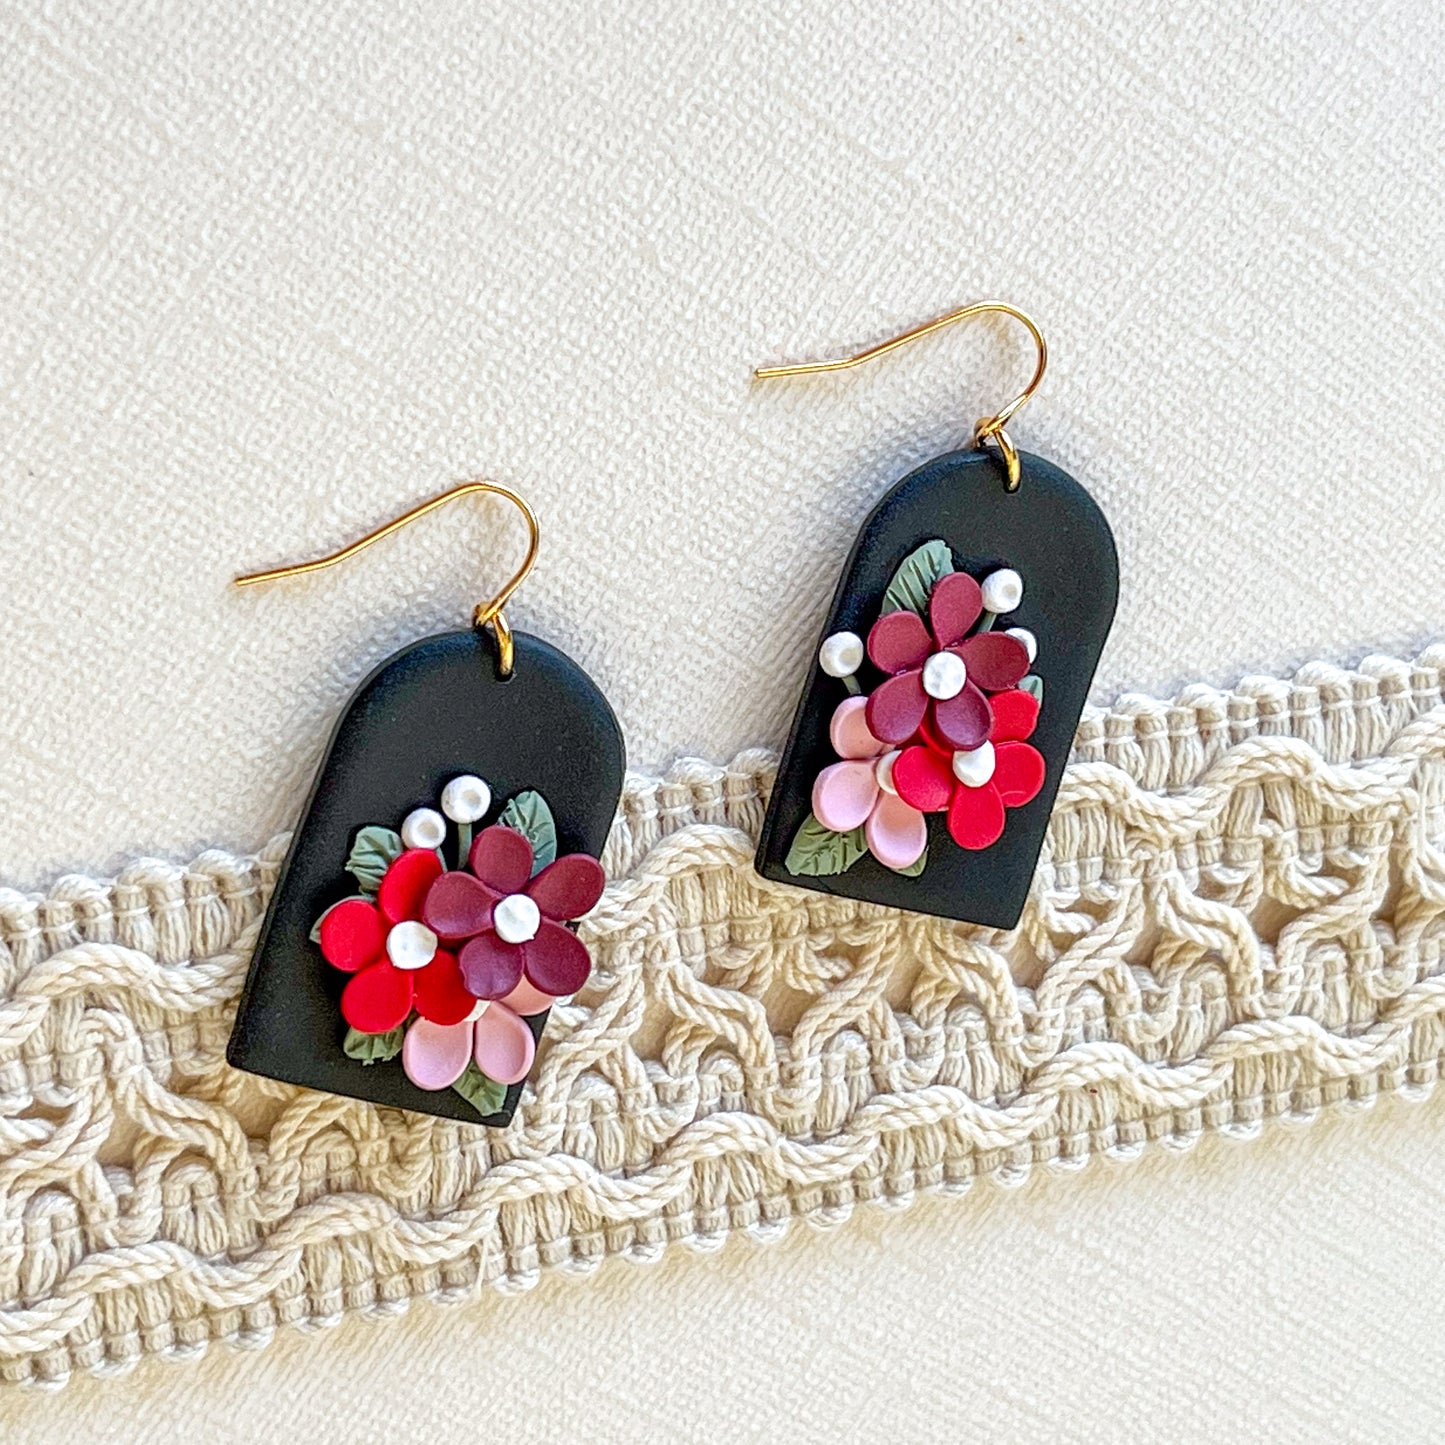 Black and red floral arch earrings | 18k gold plated